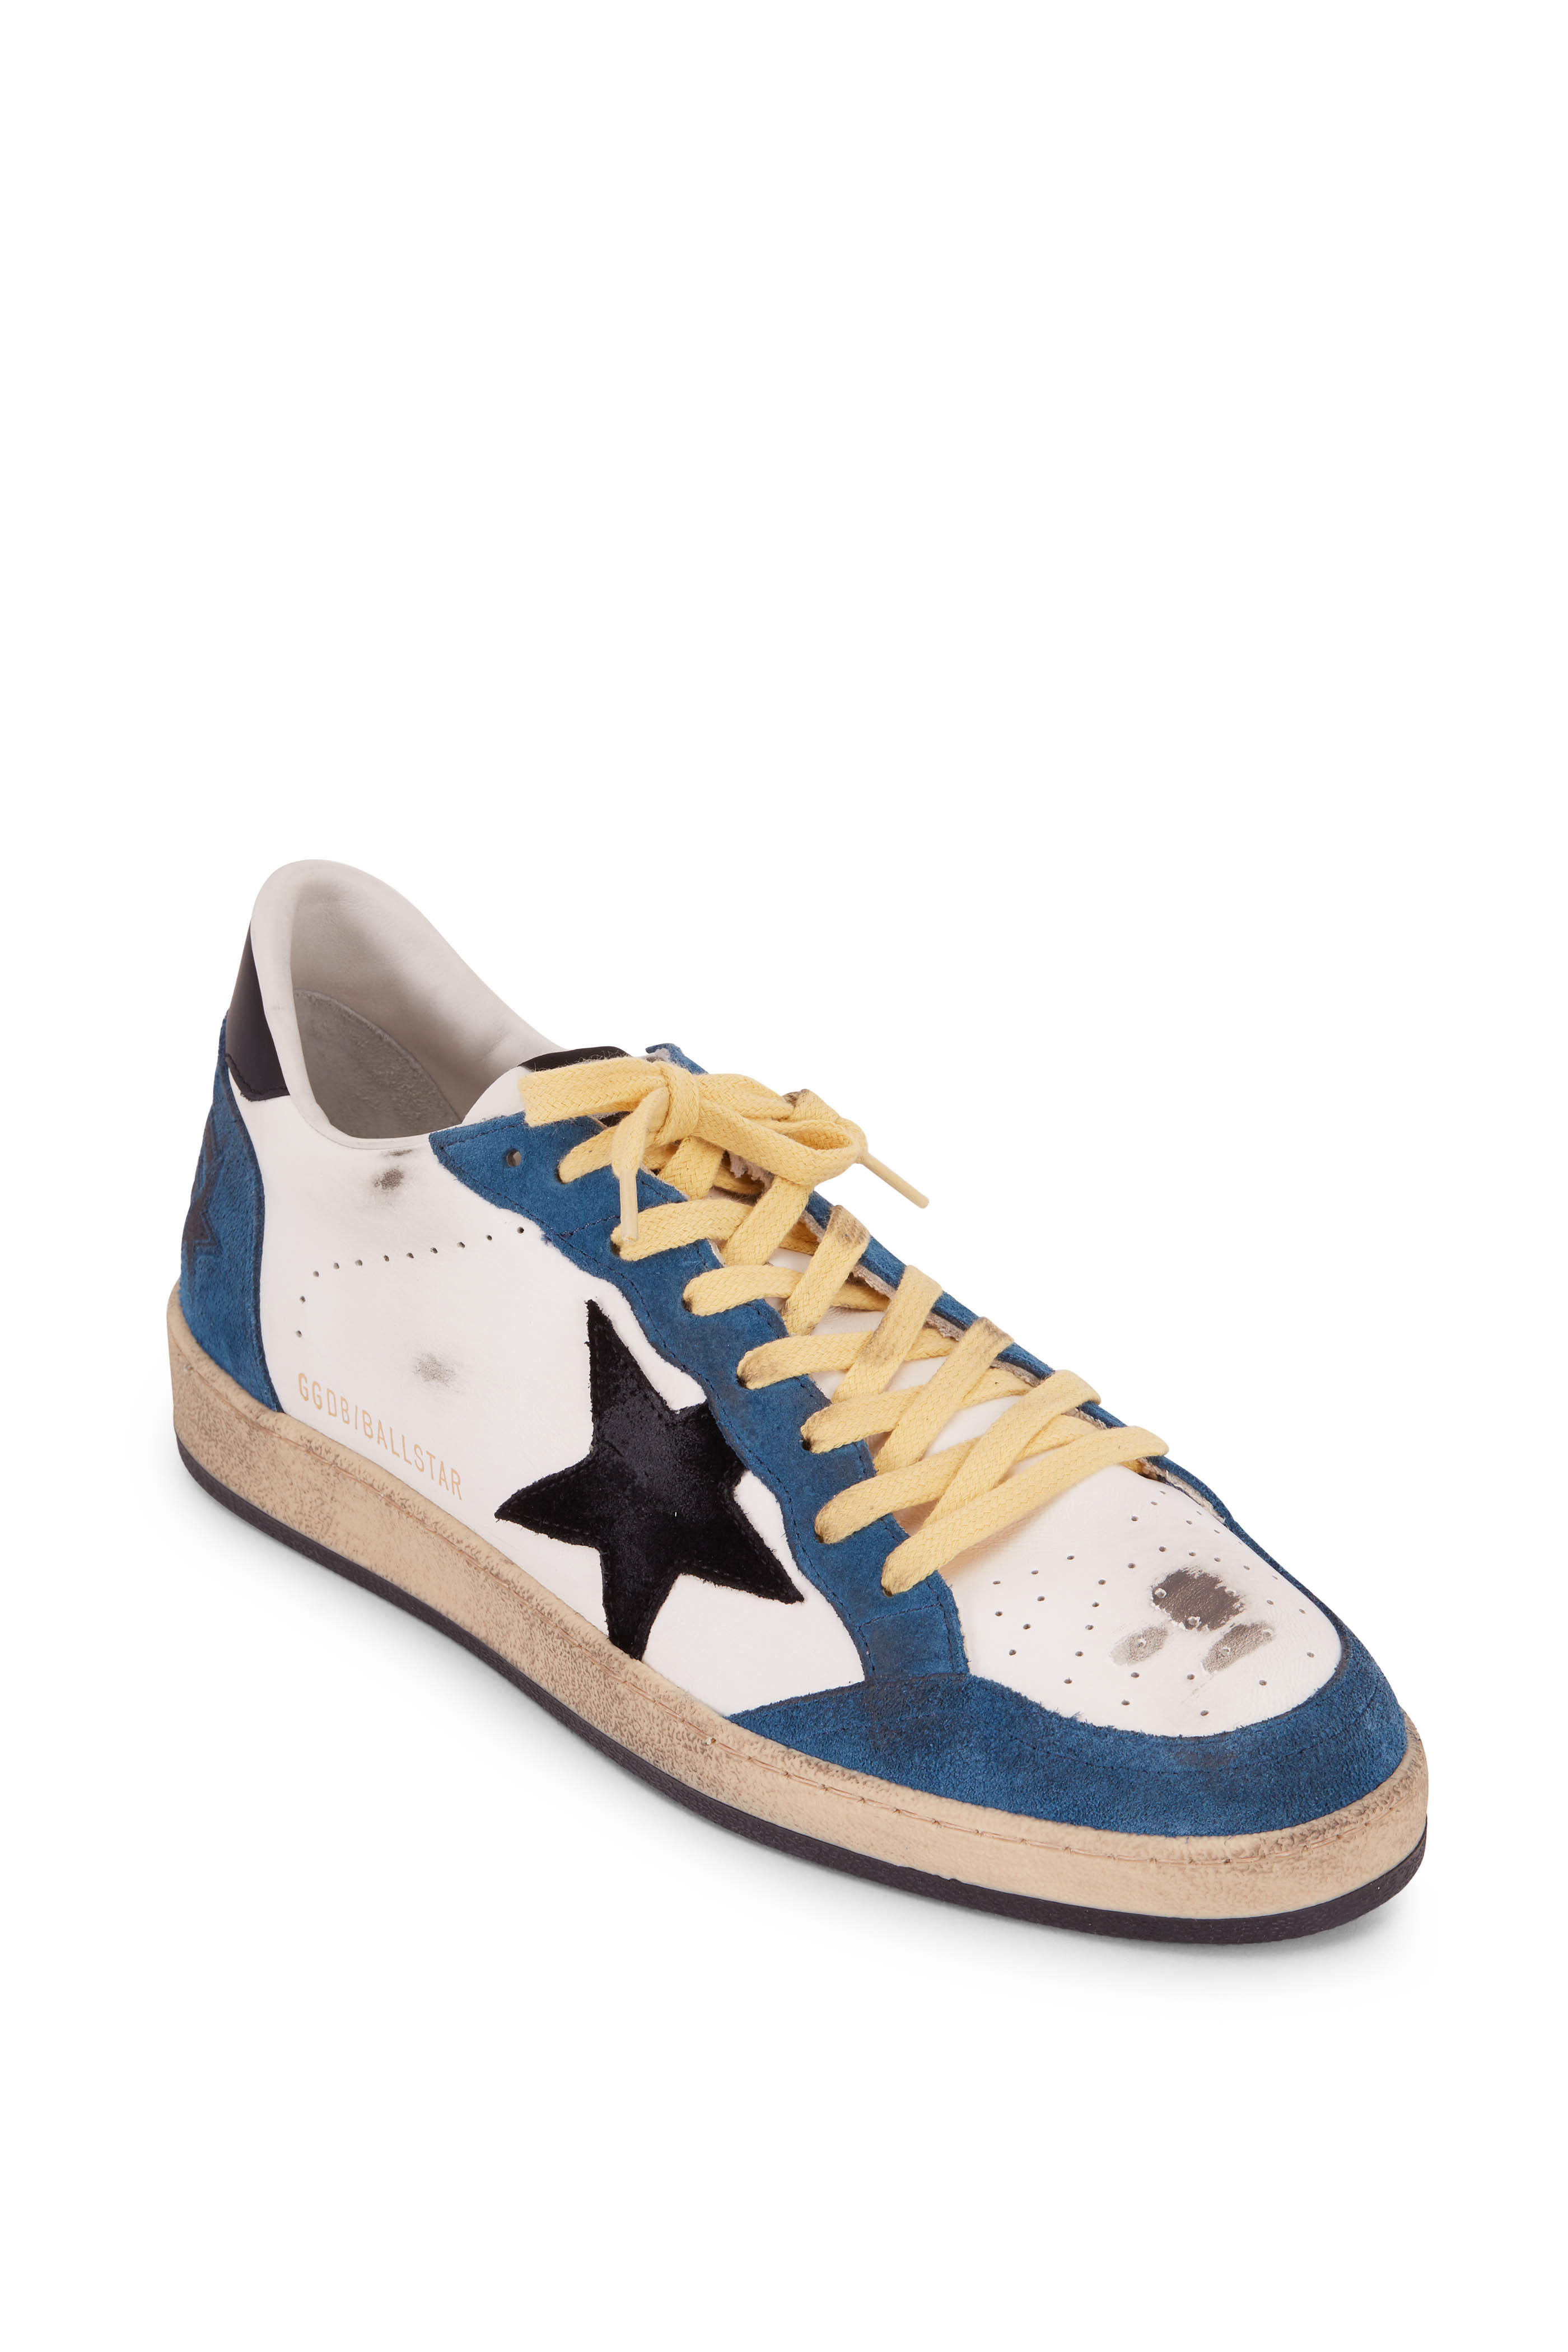 Golden Goose - Star & Leather Sneaker | Mitchell Stores